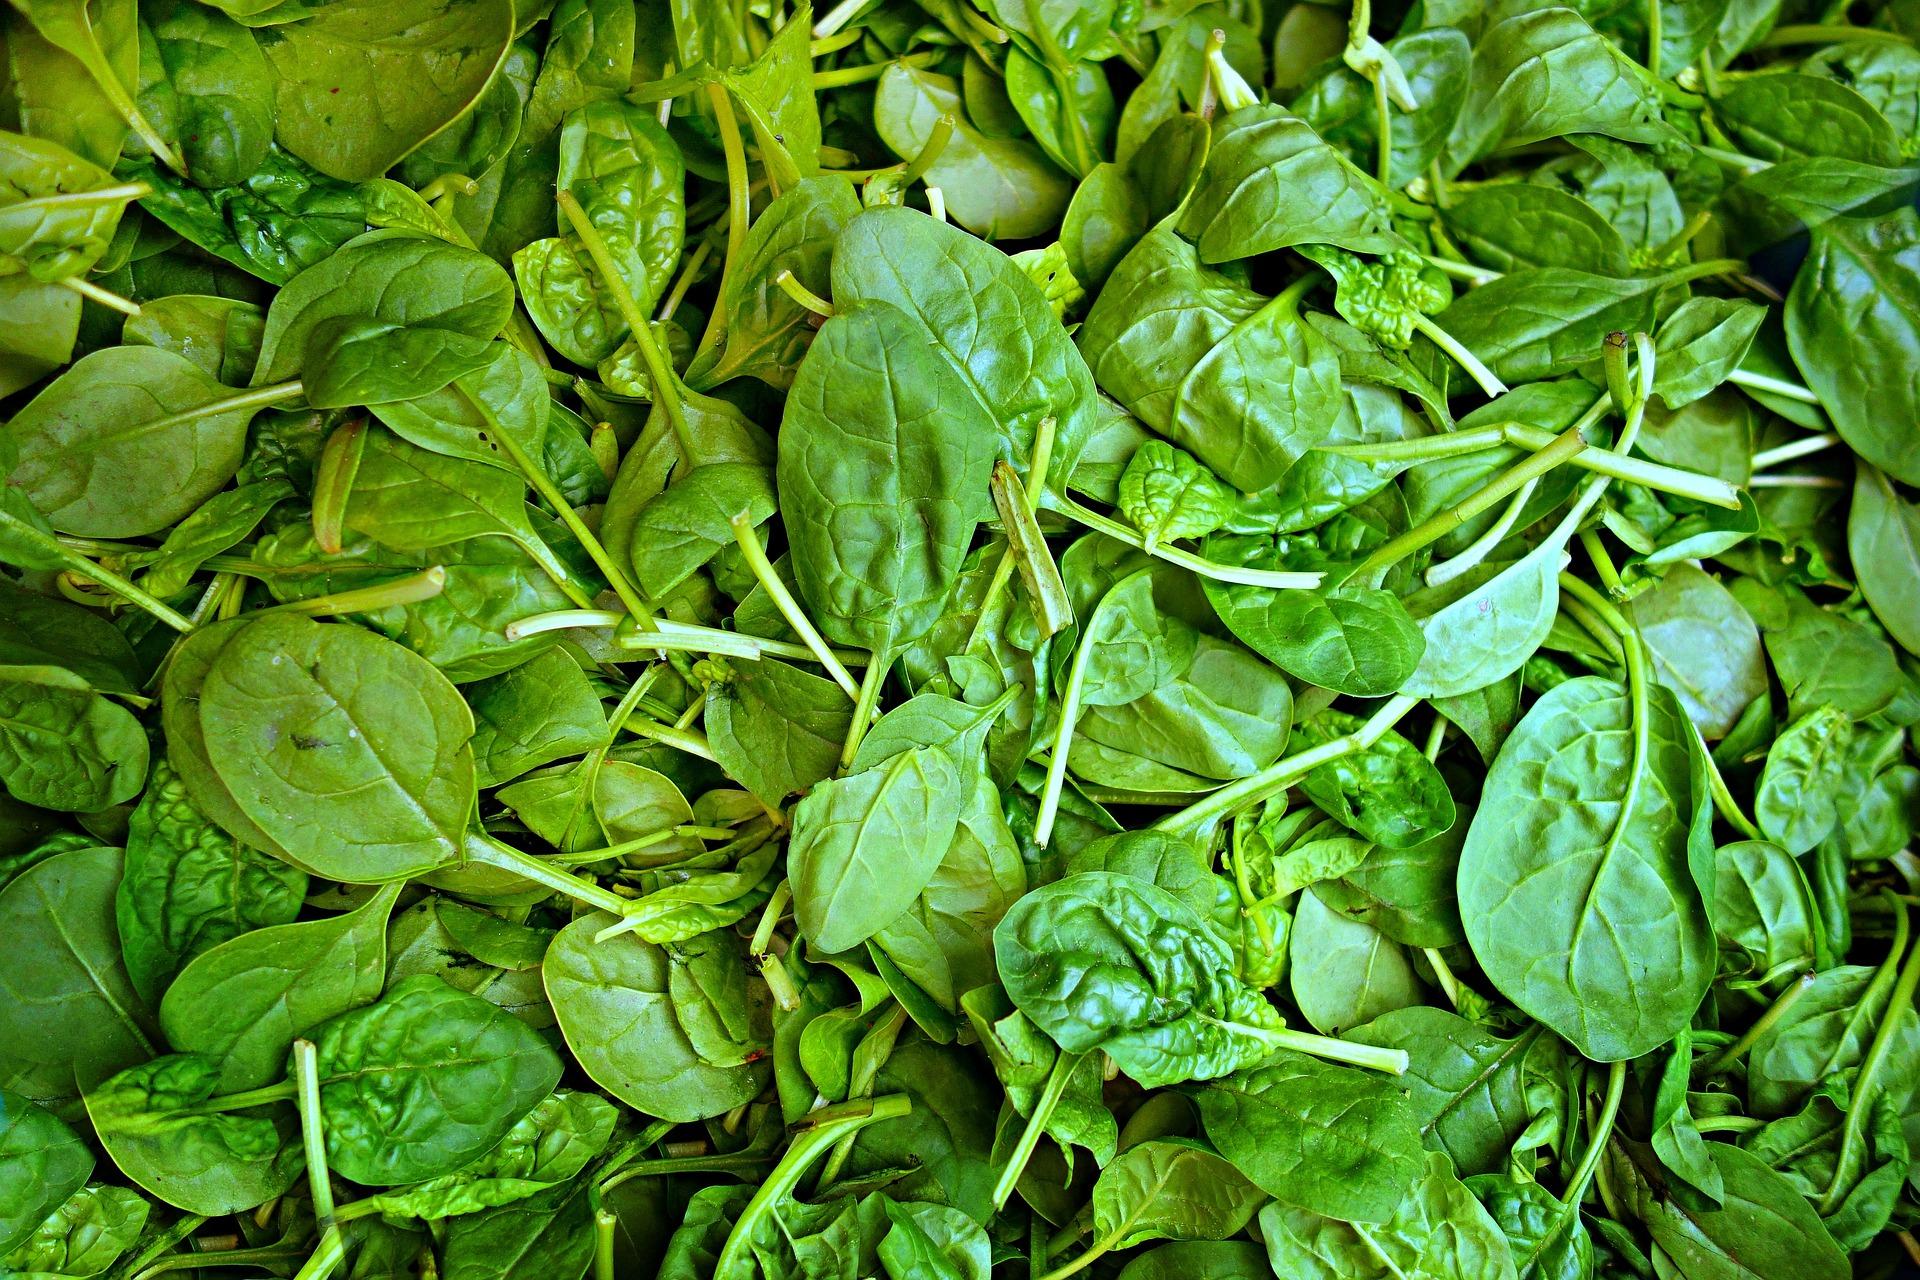 uploads/images/Spinach 1522283_1920